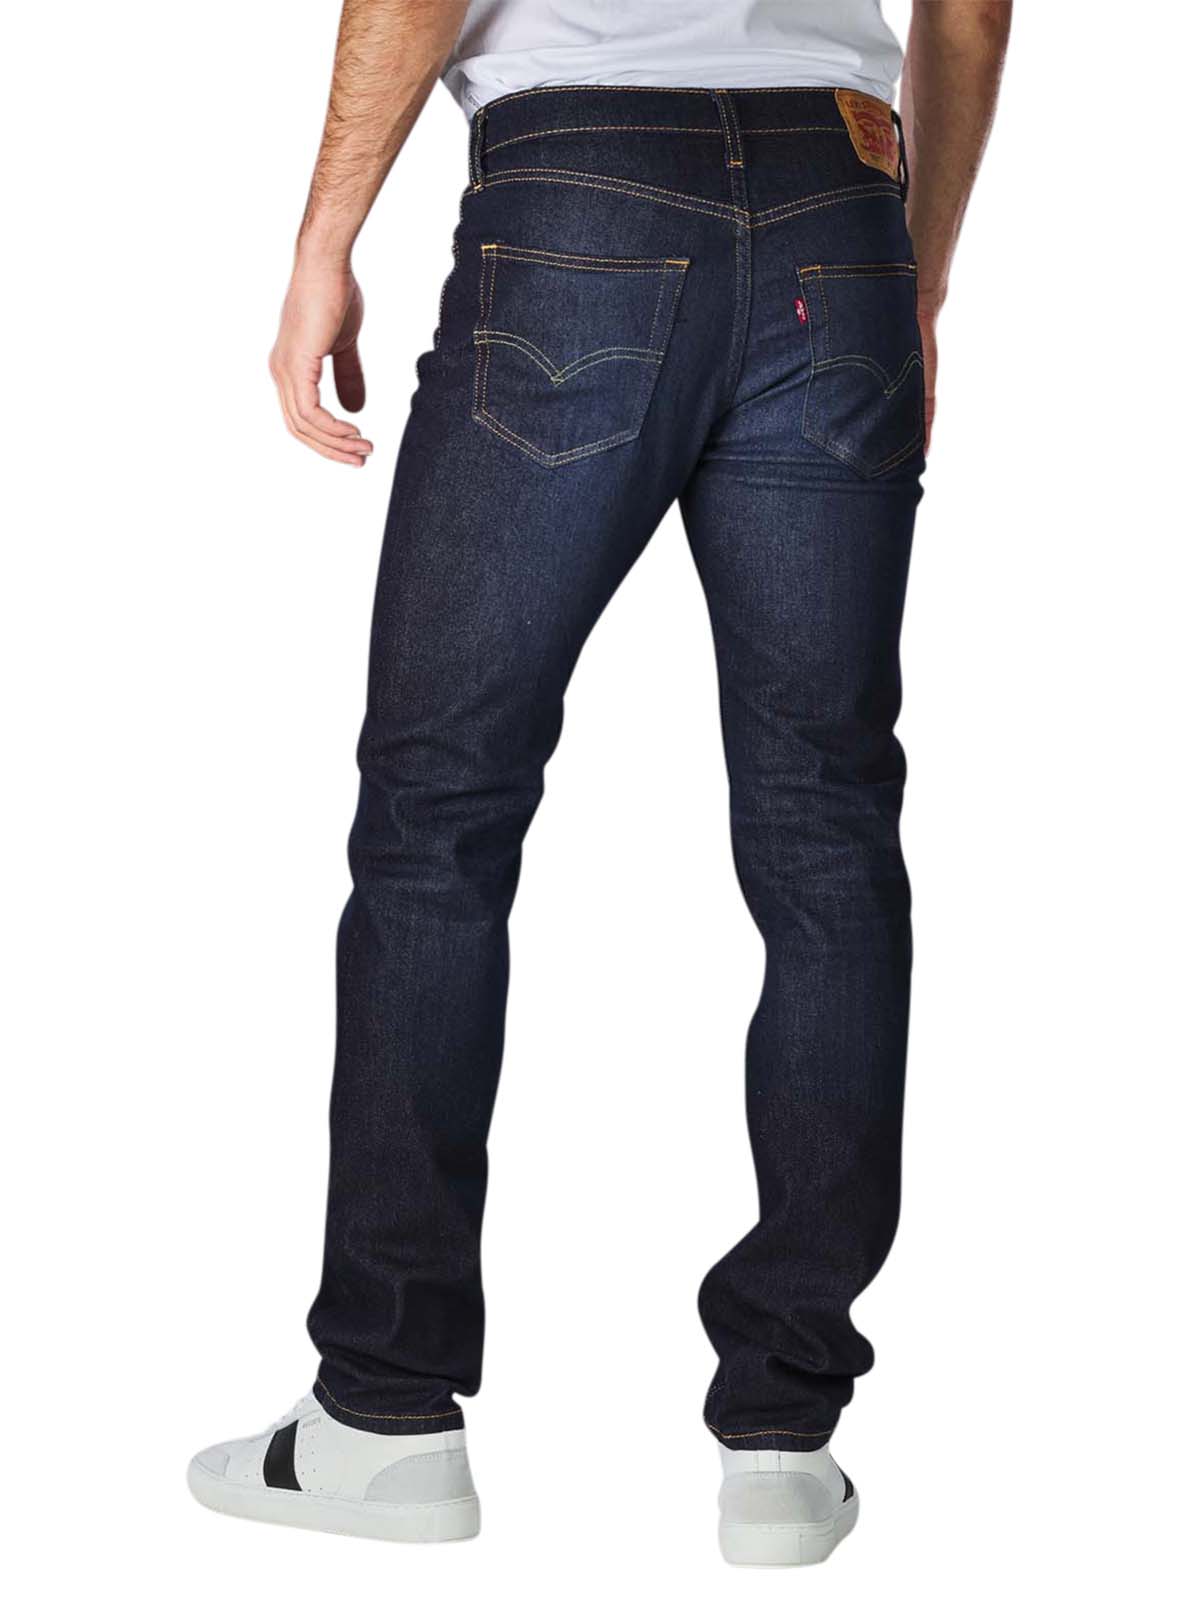 Levi's 511 Jeans Slim Fit myers crescent adv Levi's Men's Jeans | Free  Shipping on  - SIMPLY LOOK GOOD